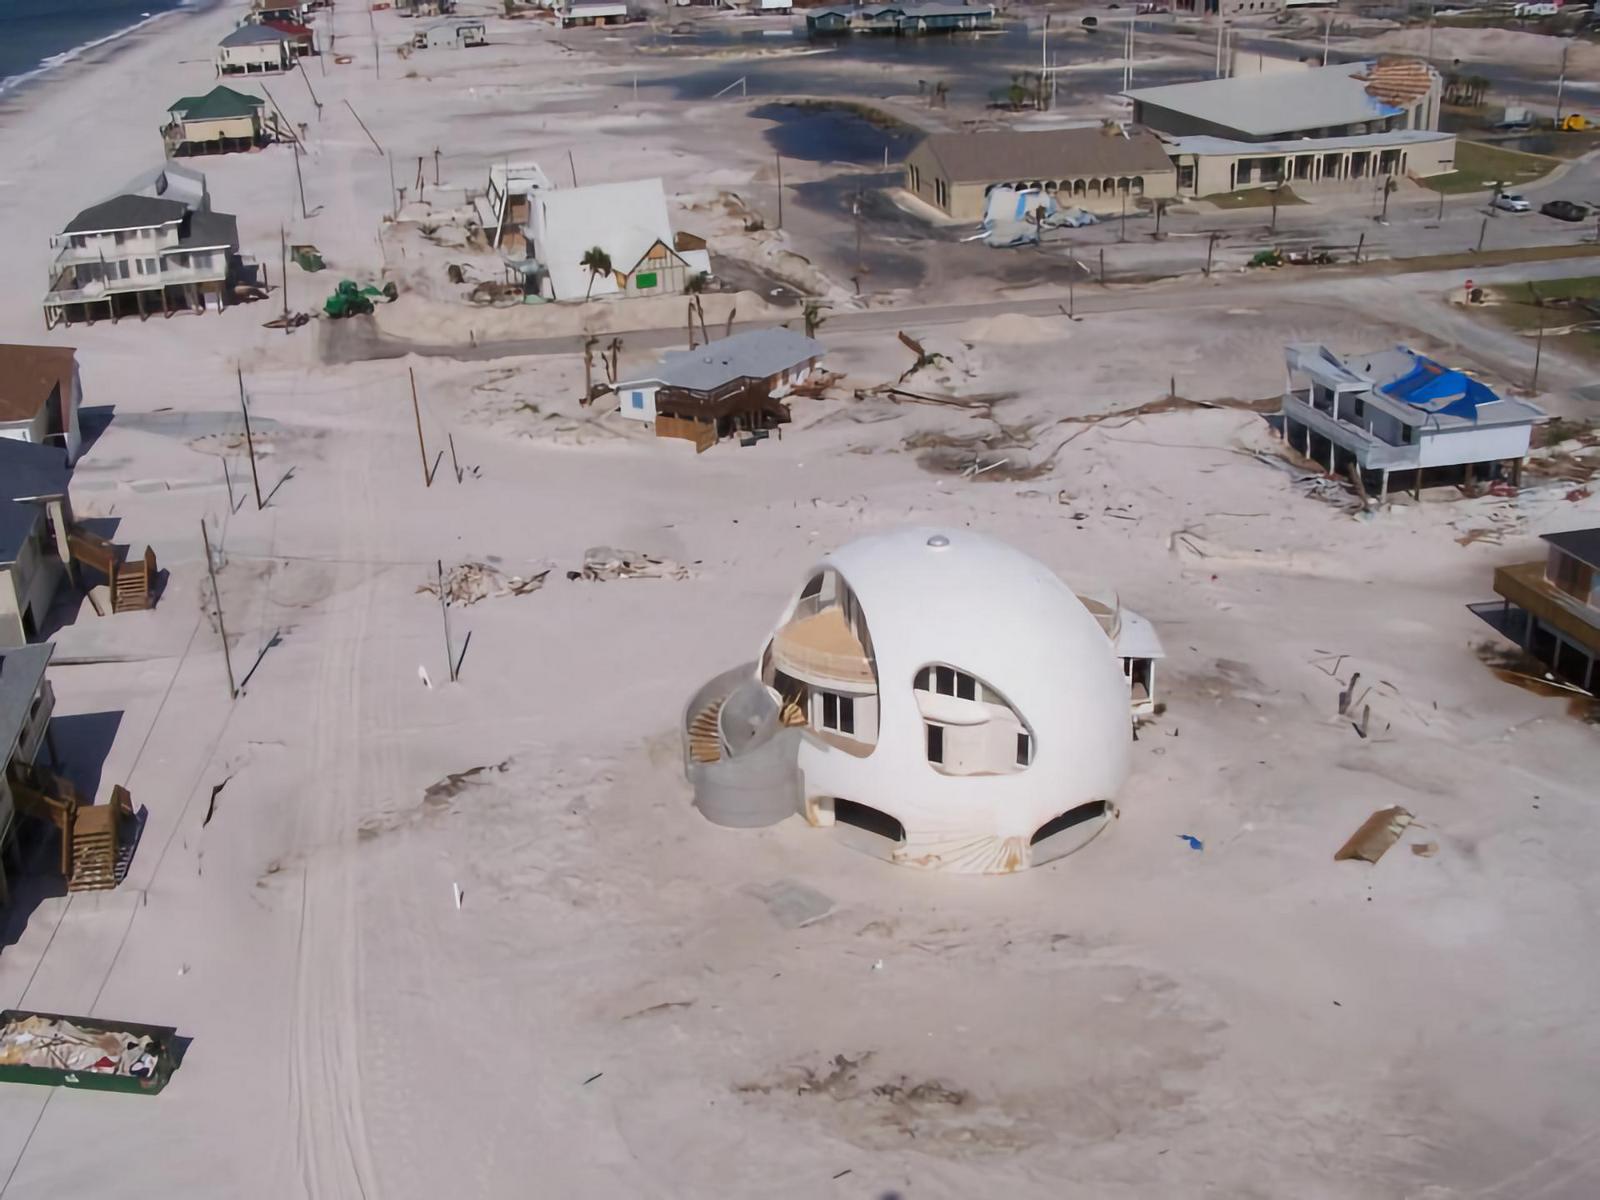 Figure 7: Damage of area surrounding "Dome of a Home".